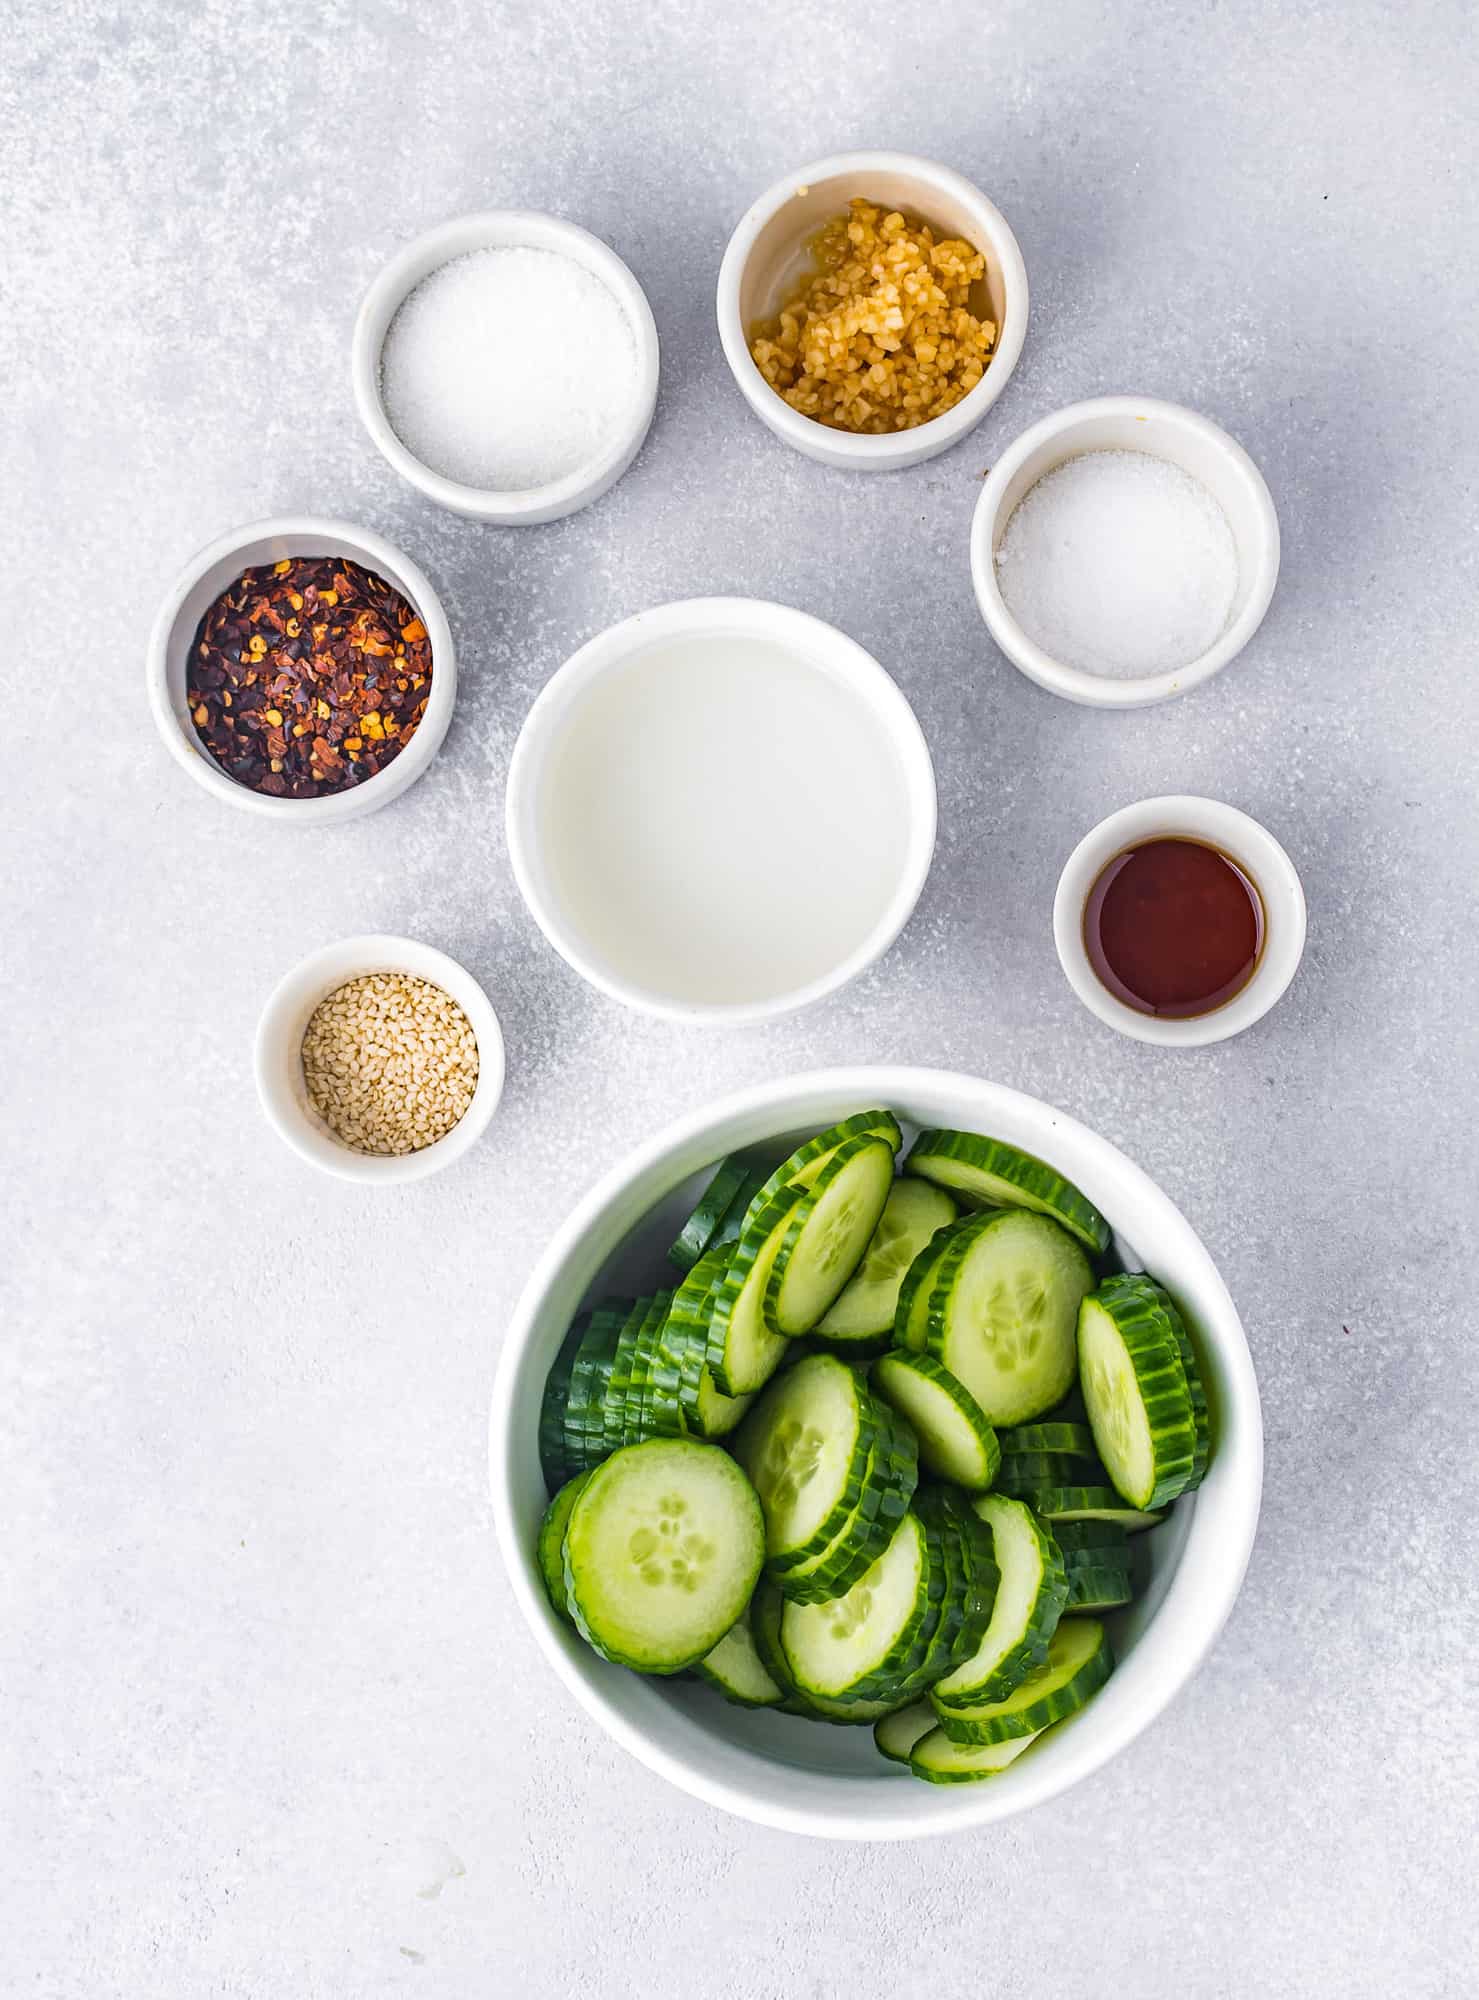 Ingredients needed in separate bowls including sliced cucumber.